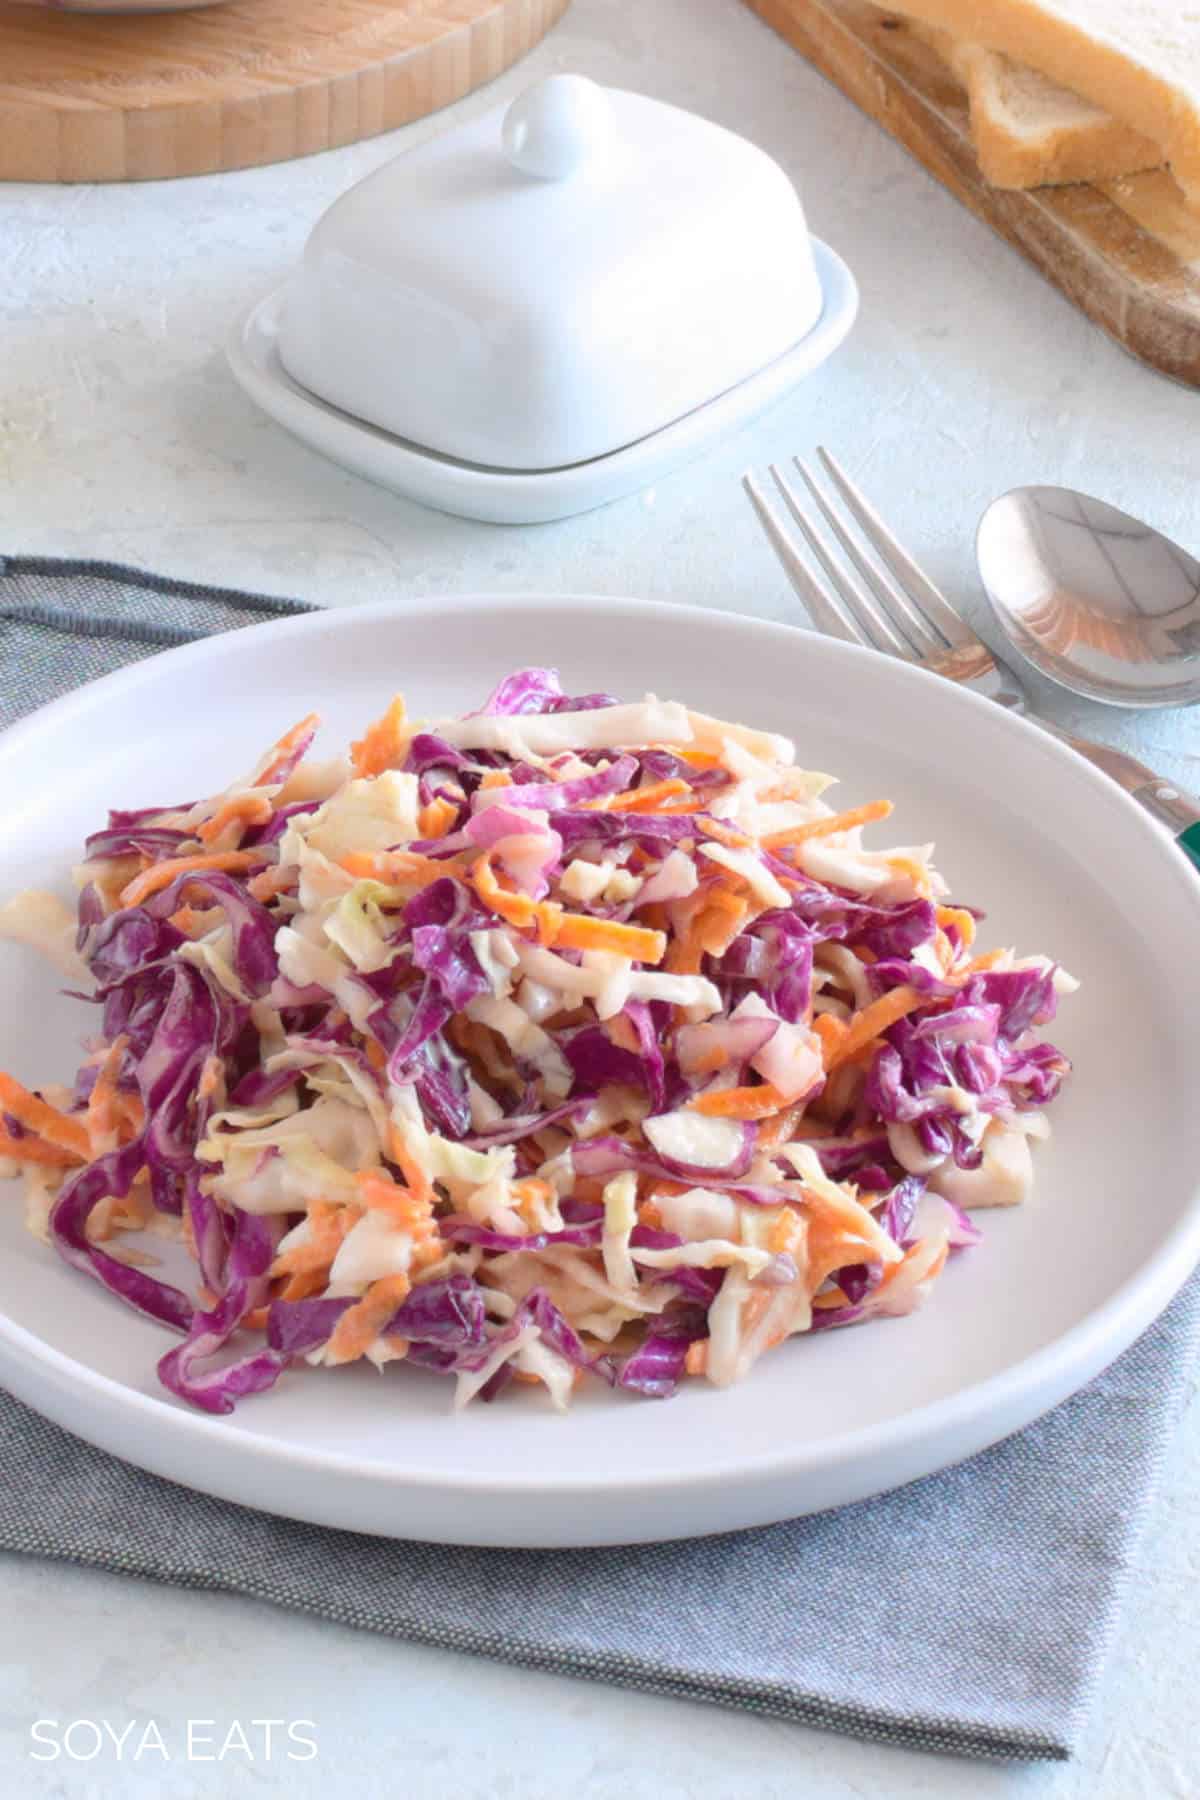 Coleslaw on a wide white plate.